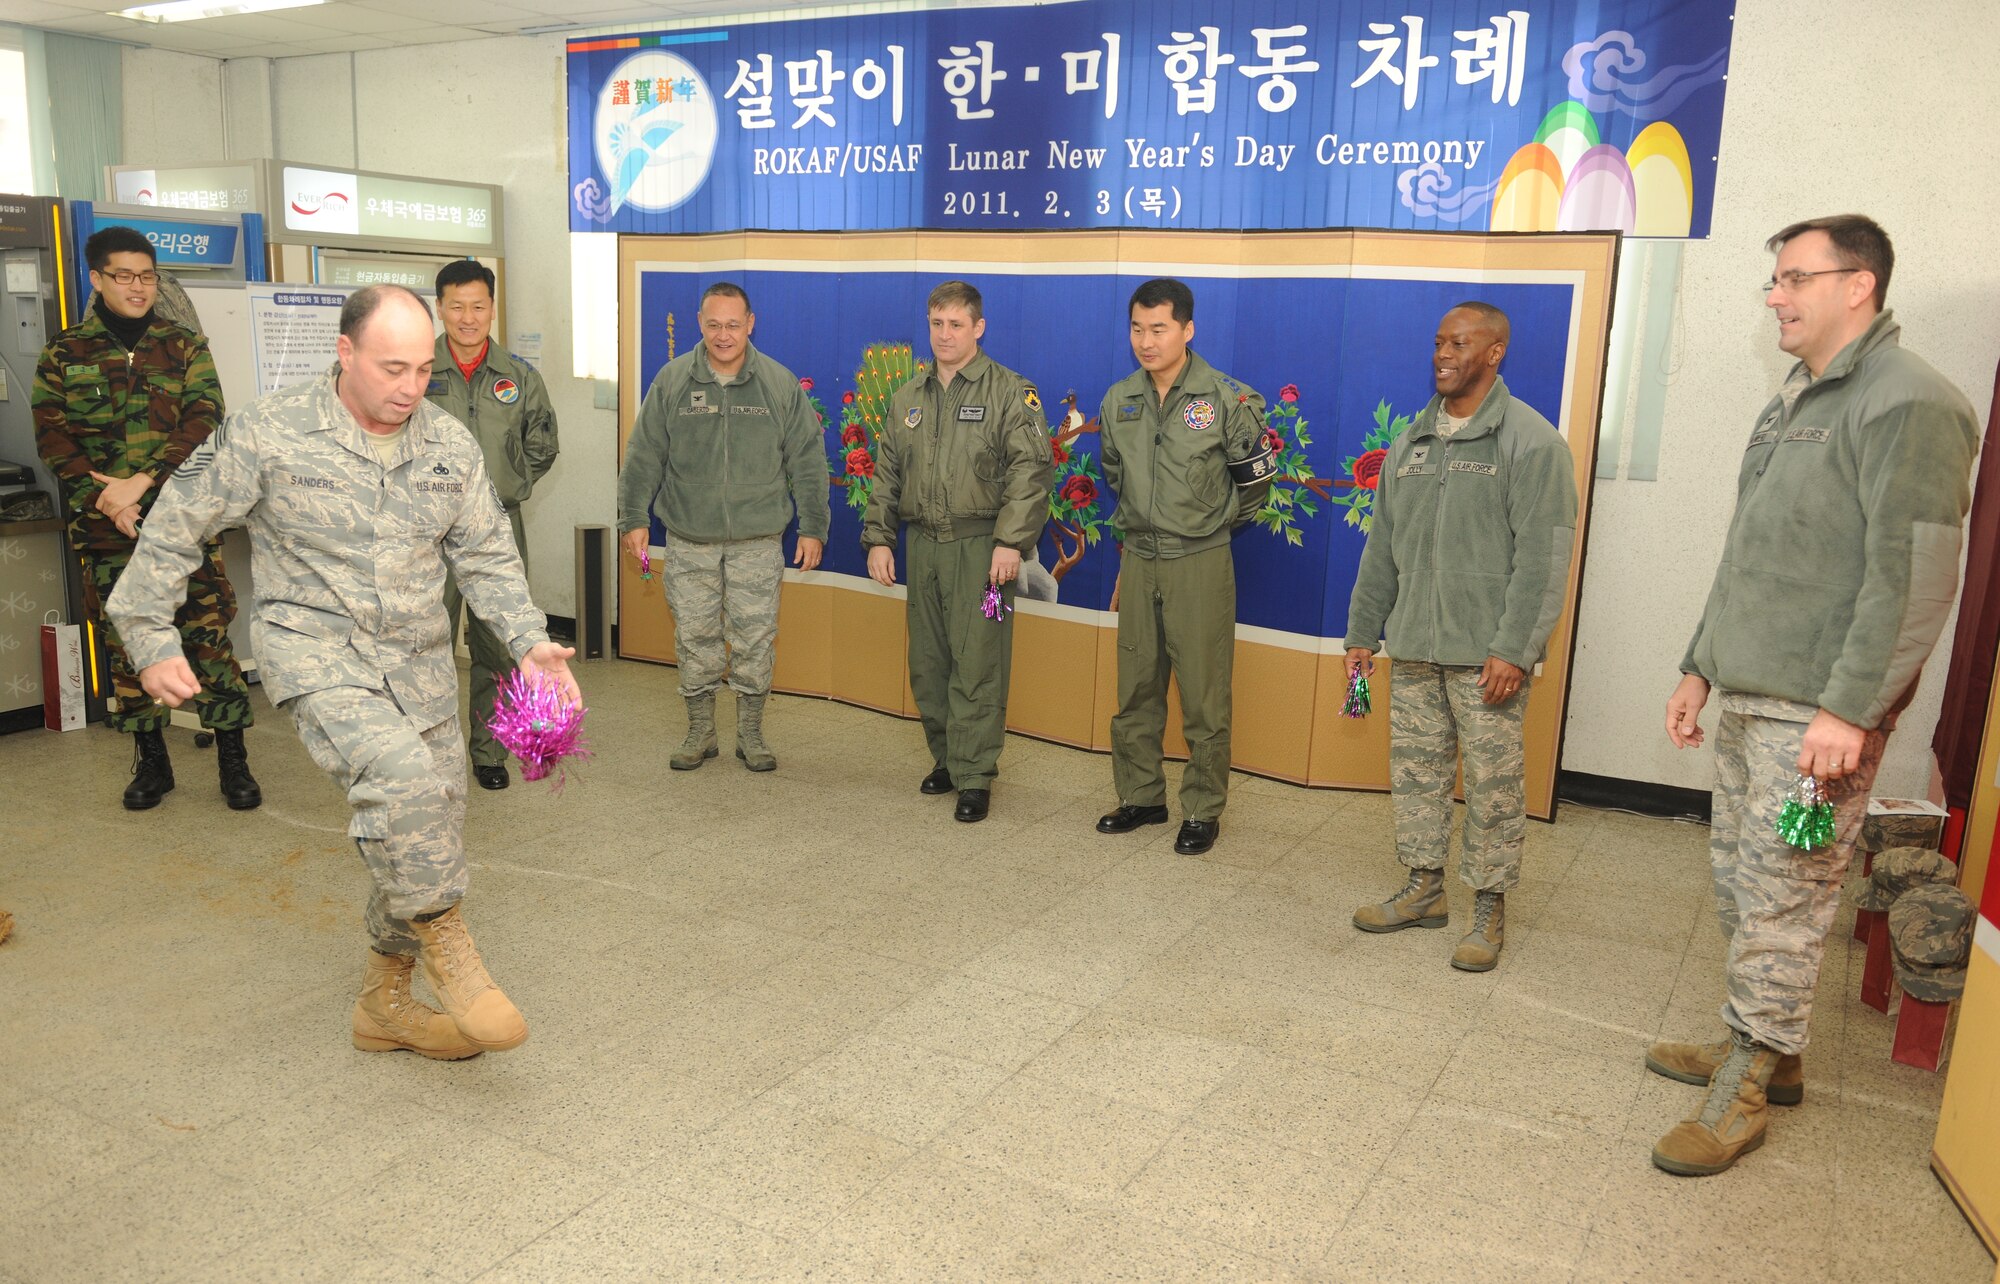 KUNSAN AIR BASE, Republic of Korea -- Chief Master Sgt. James Sanders, 8th Fighter Wing command chief, plays the traditional Korean game of Chegi during a Lunar New Year ceremony in the Republic of Korea Air Force base exchange Feb. 3. The combined 8th Fighter Wing and ROKAF 38th Fighter Group ceremony included a memorial service, ceremonial bowing, a traditional Korean breakfast and traditional games. (U.S. Air Force photo/Senior Airman Ciara Wymbs)